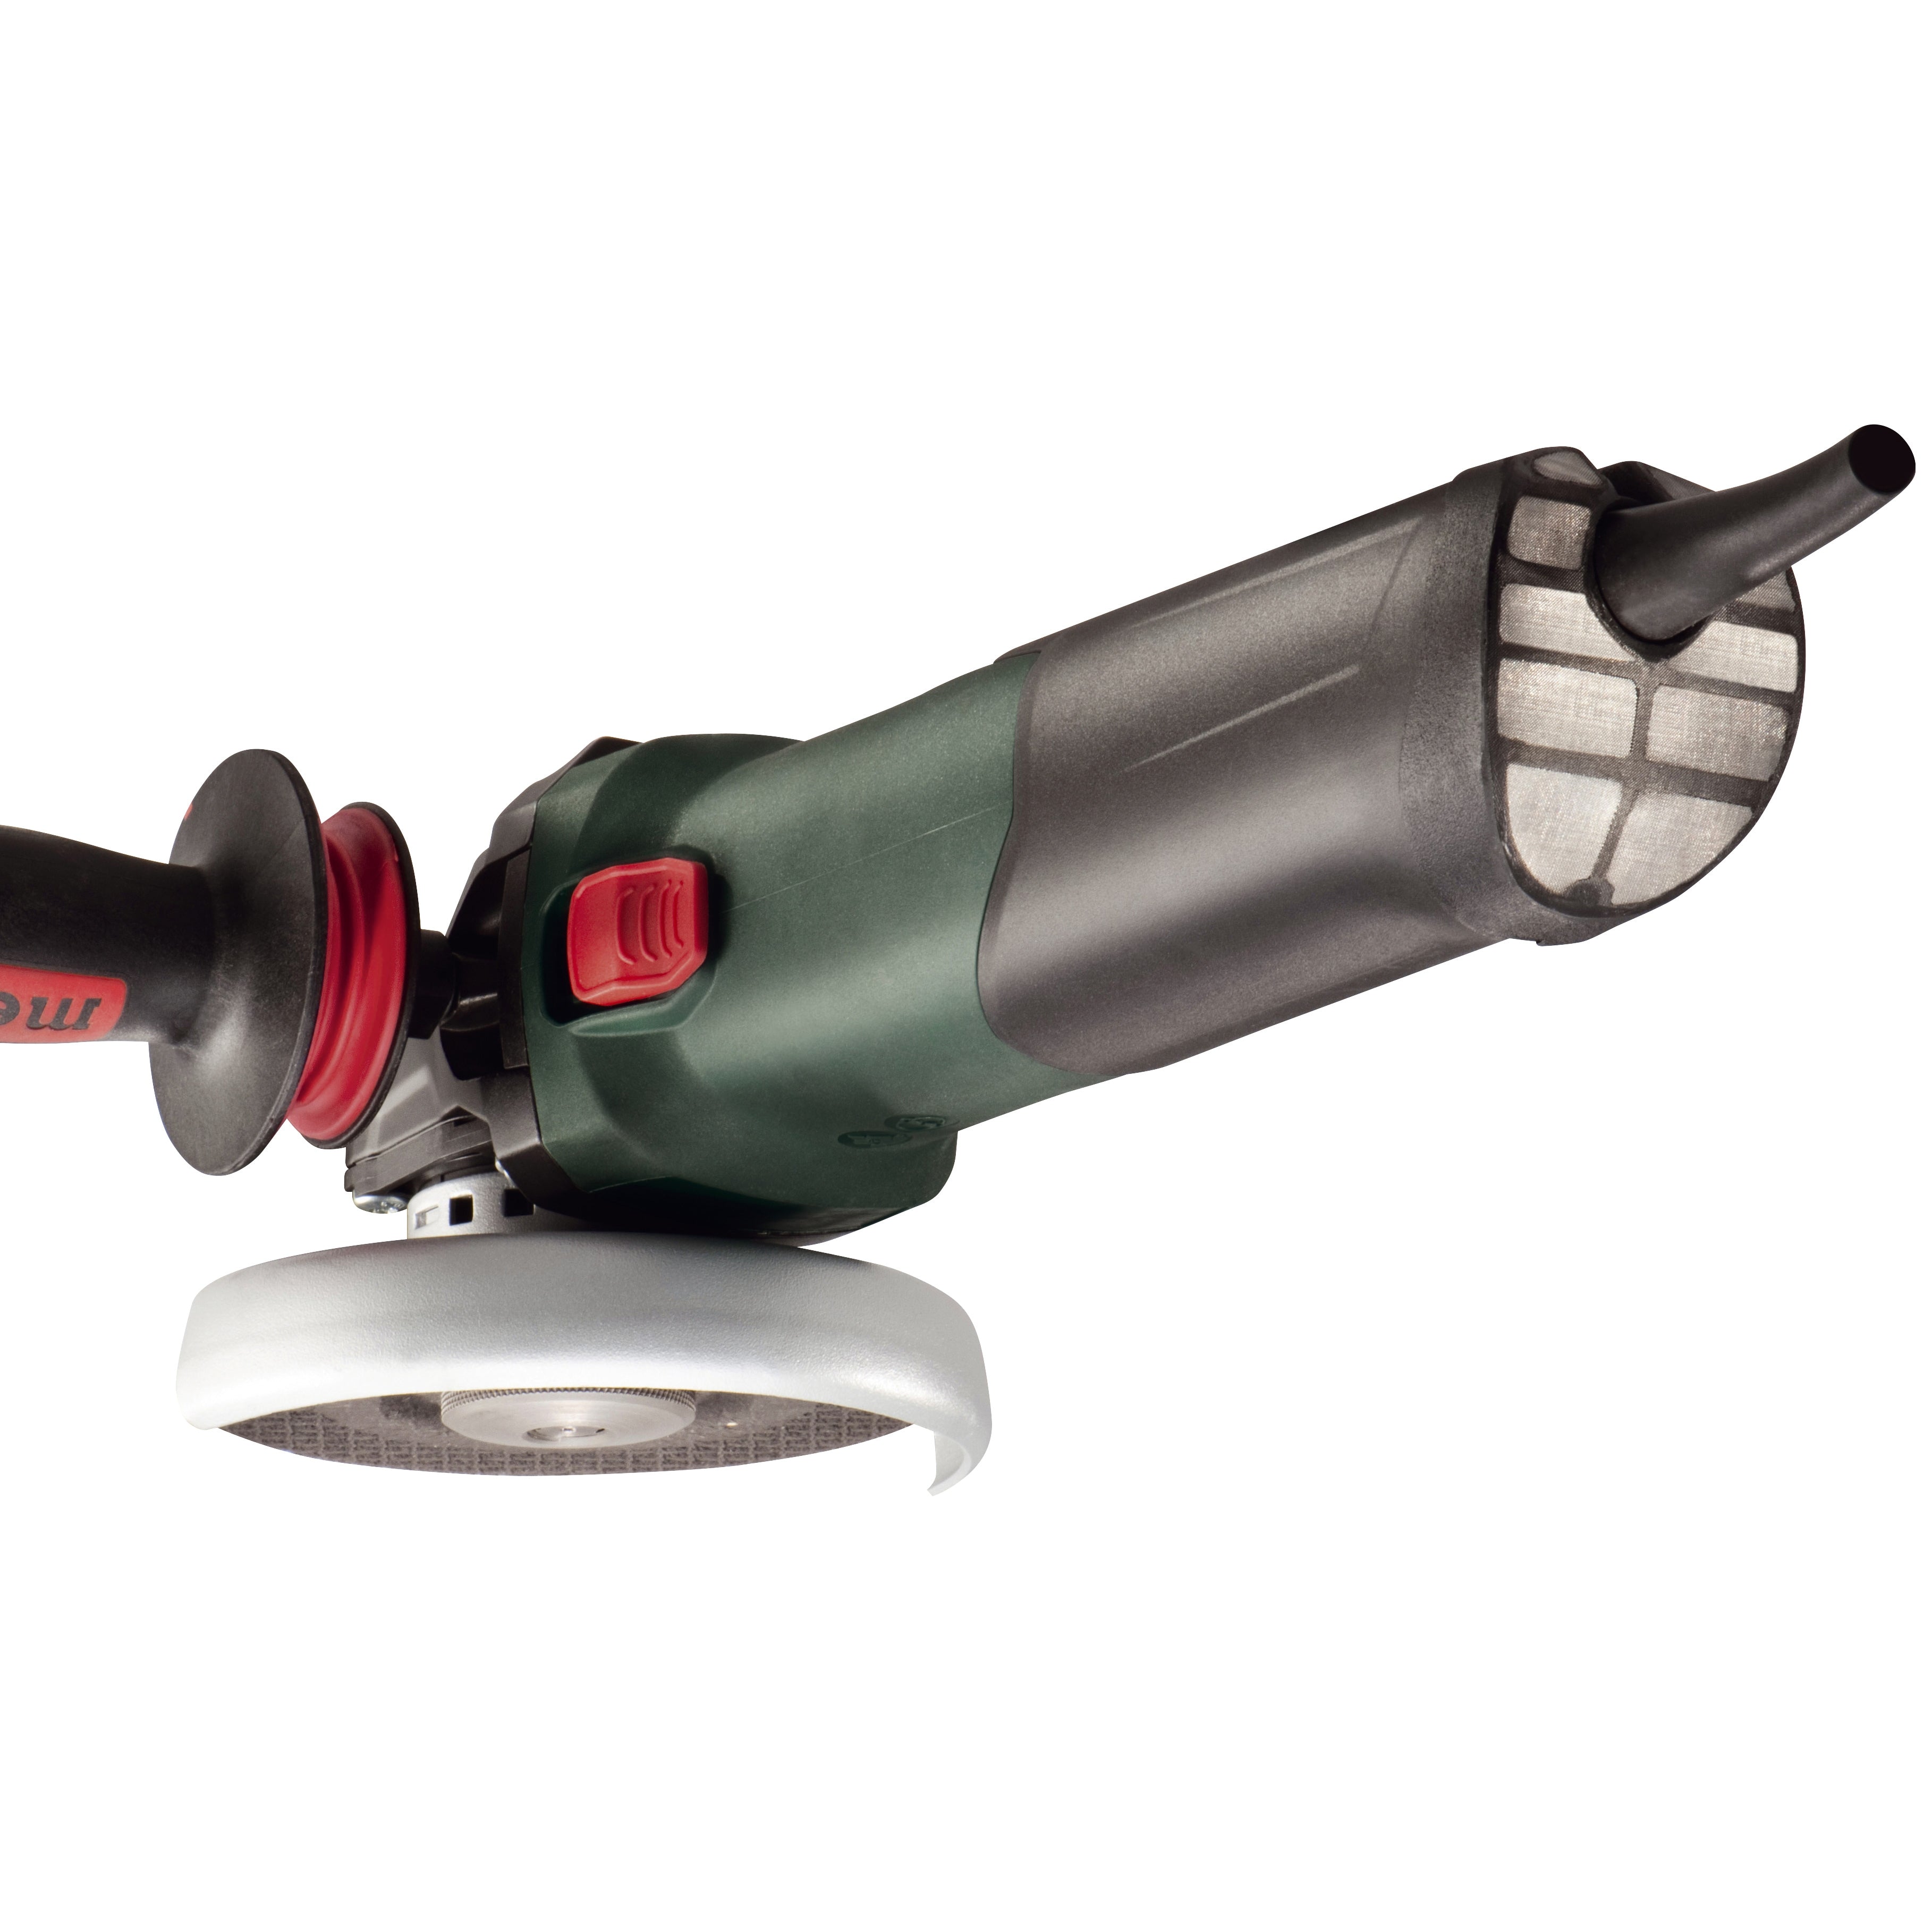 Metabo 600464420 6" 13.5 Amp Angle Grinder with TC Electronics (WE 15-150 Quick)